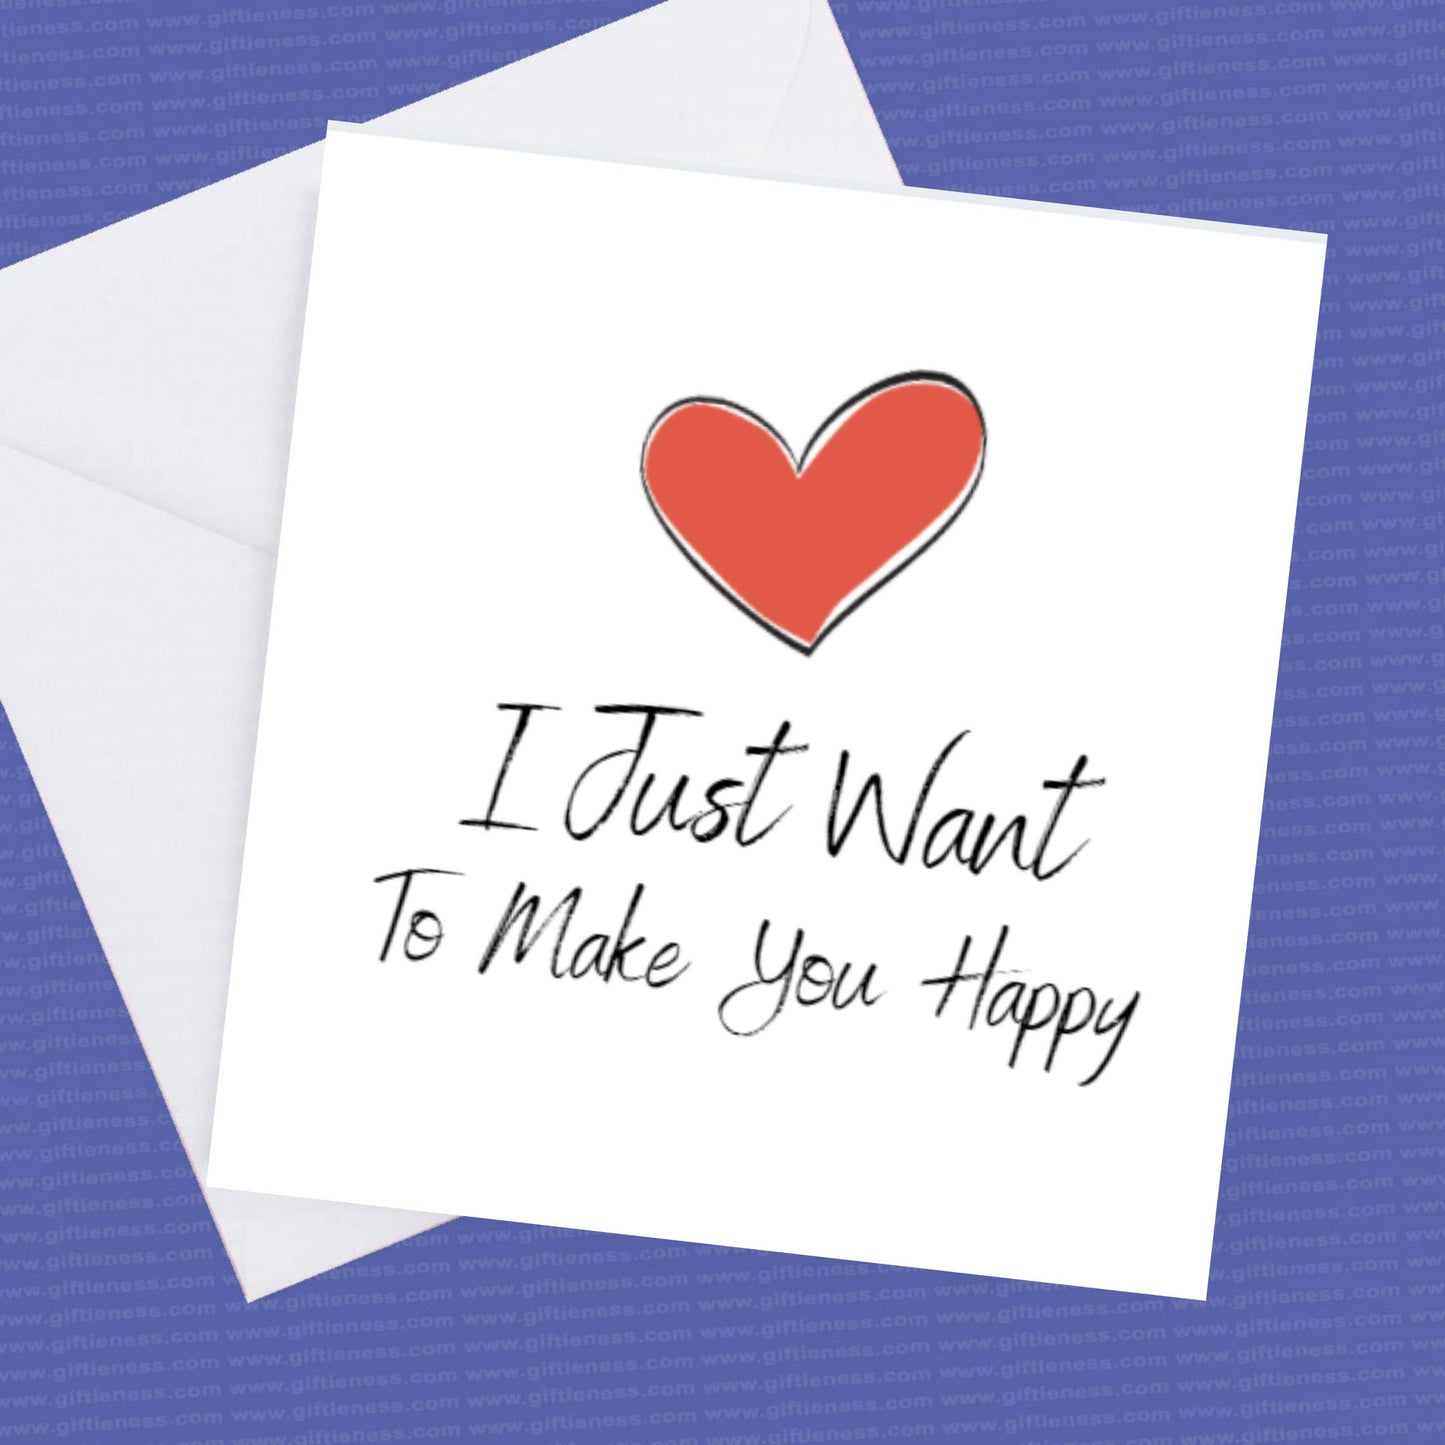 I Just Want To Make You Happy Card and Envelope